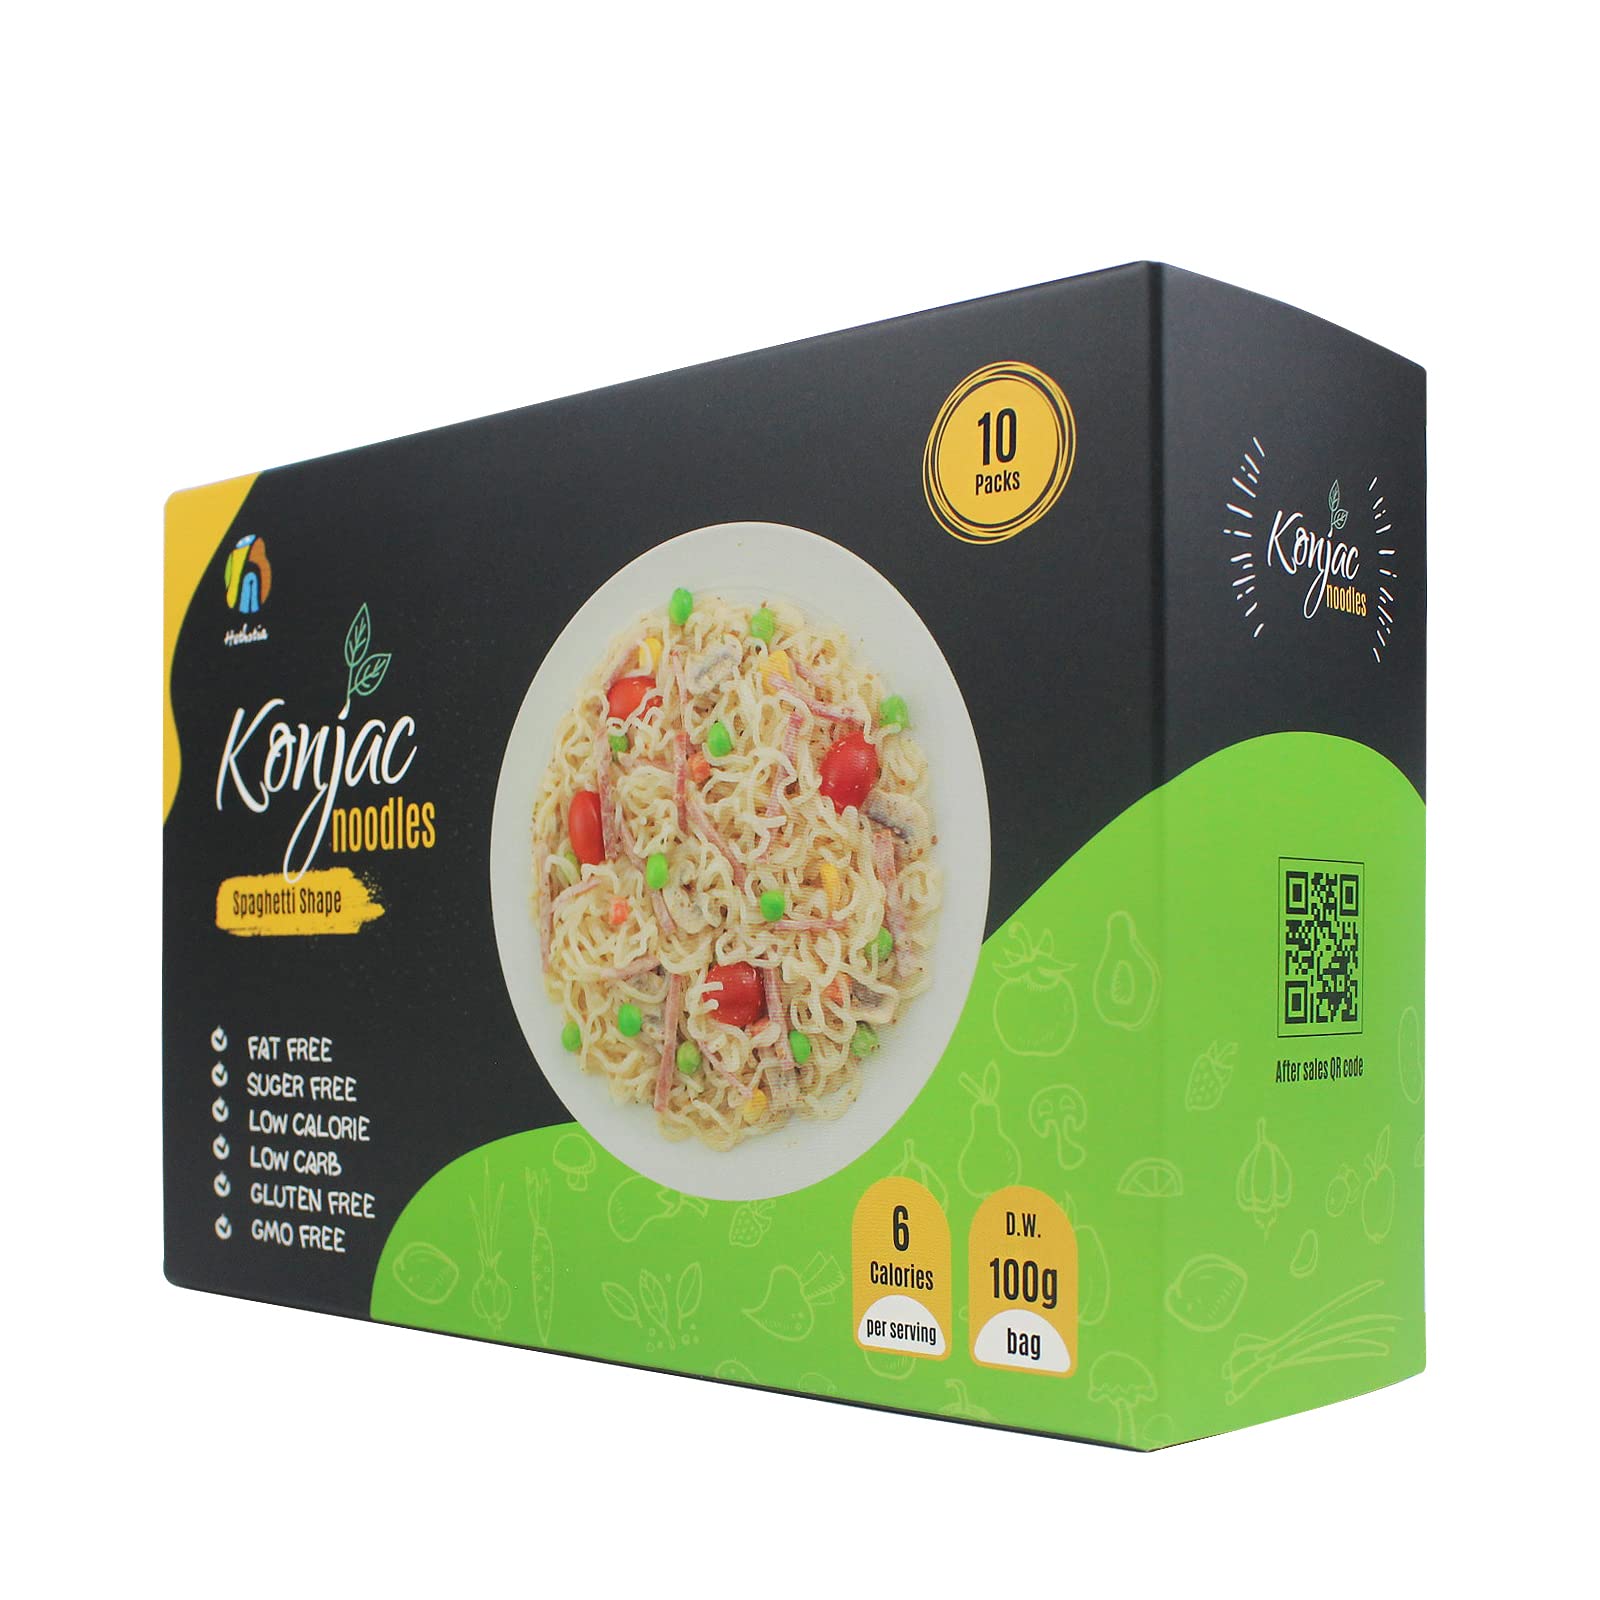 Its Skinny Variety Pack Healthy, Low Calorie, Low-Carb Konjac Pasta Fully  Cooked and Ready to Eat Gluten Free, Vegan, Keto and Paleo-Friendly (6-Pack)